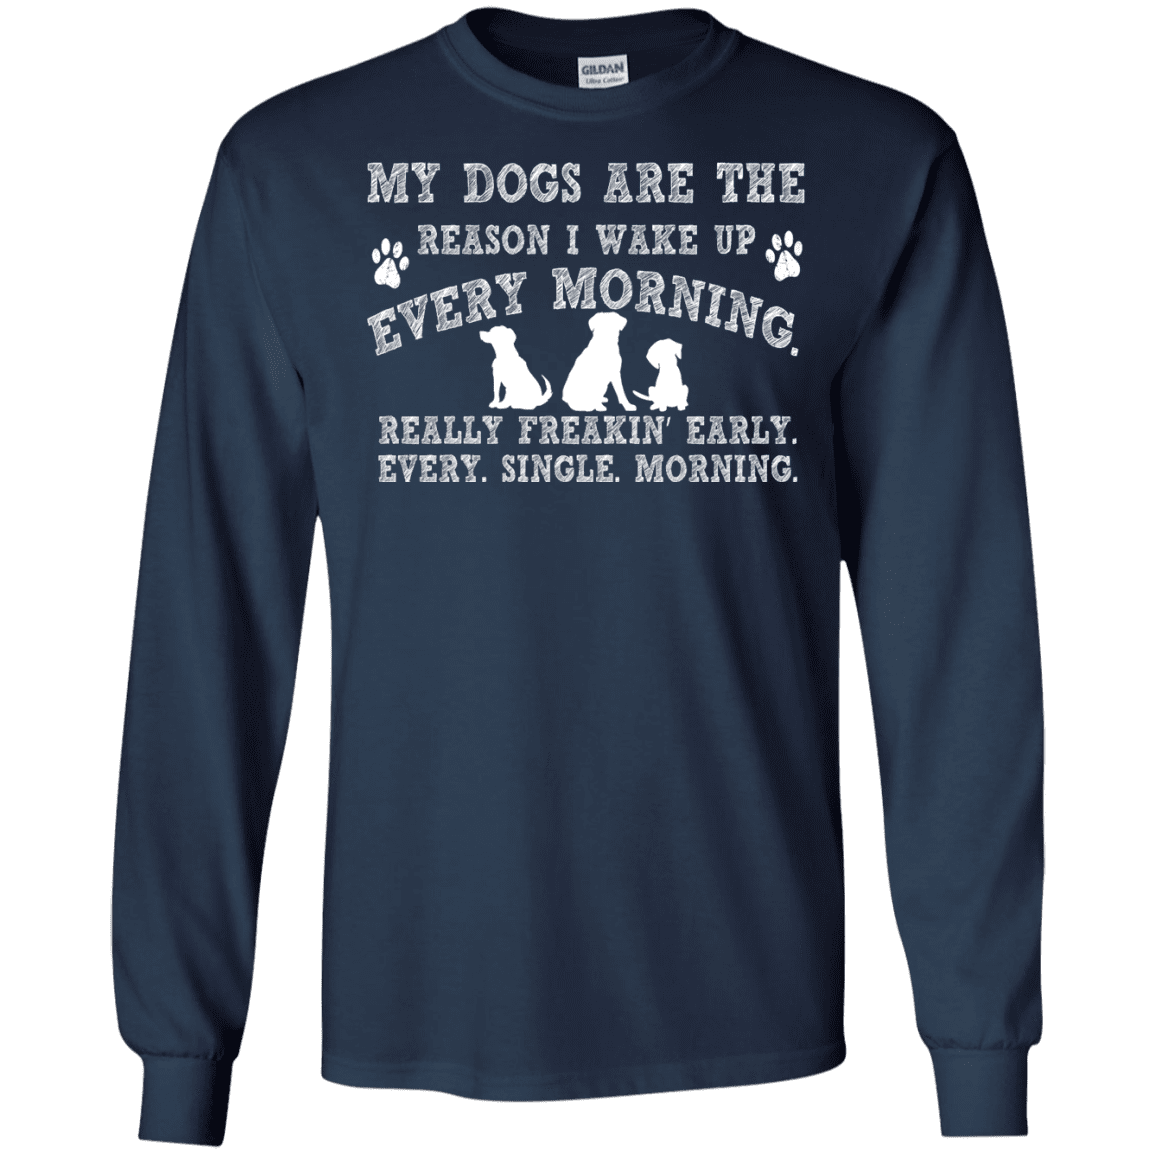 My Dogs Are The Reason - Long Sleeve T Shirt.